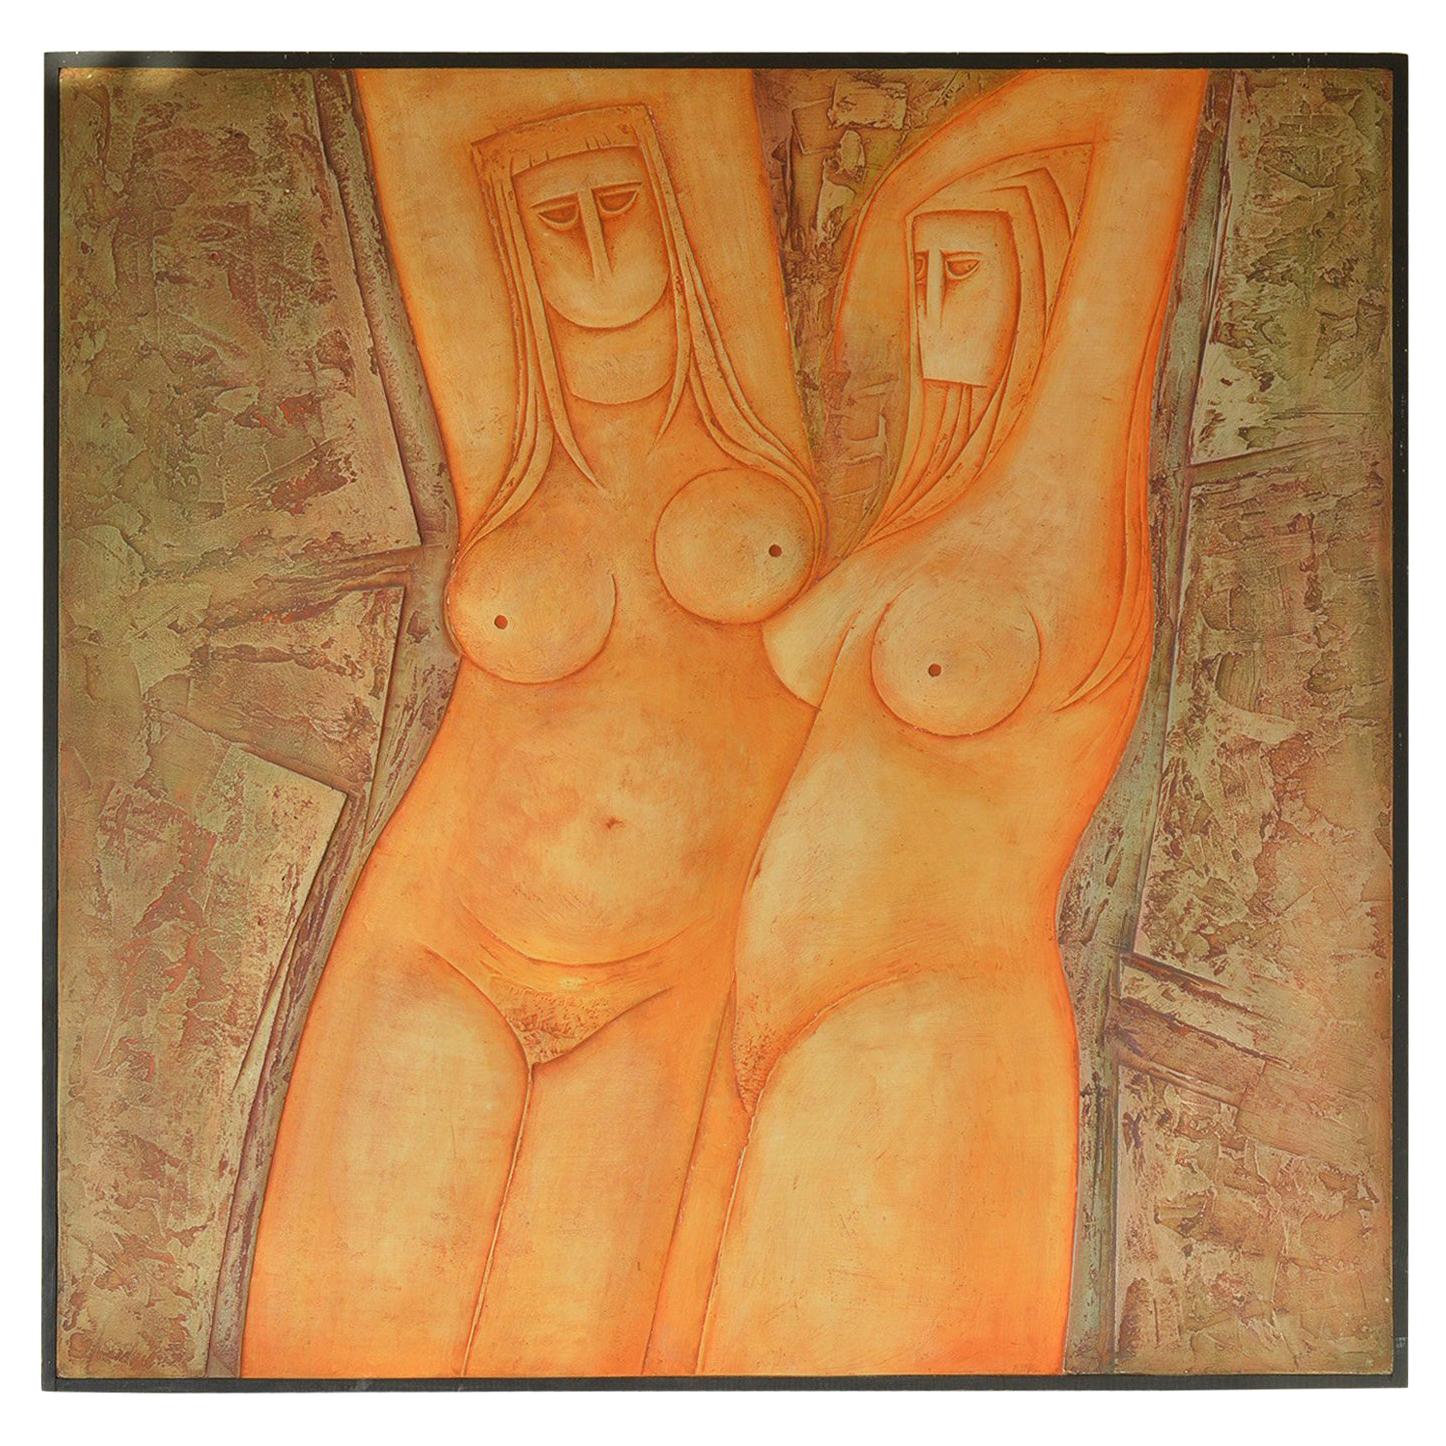 Large Nude Painted Bas-Relief by Eric Satchwell, 1973